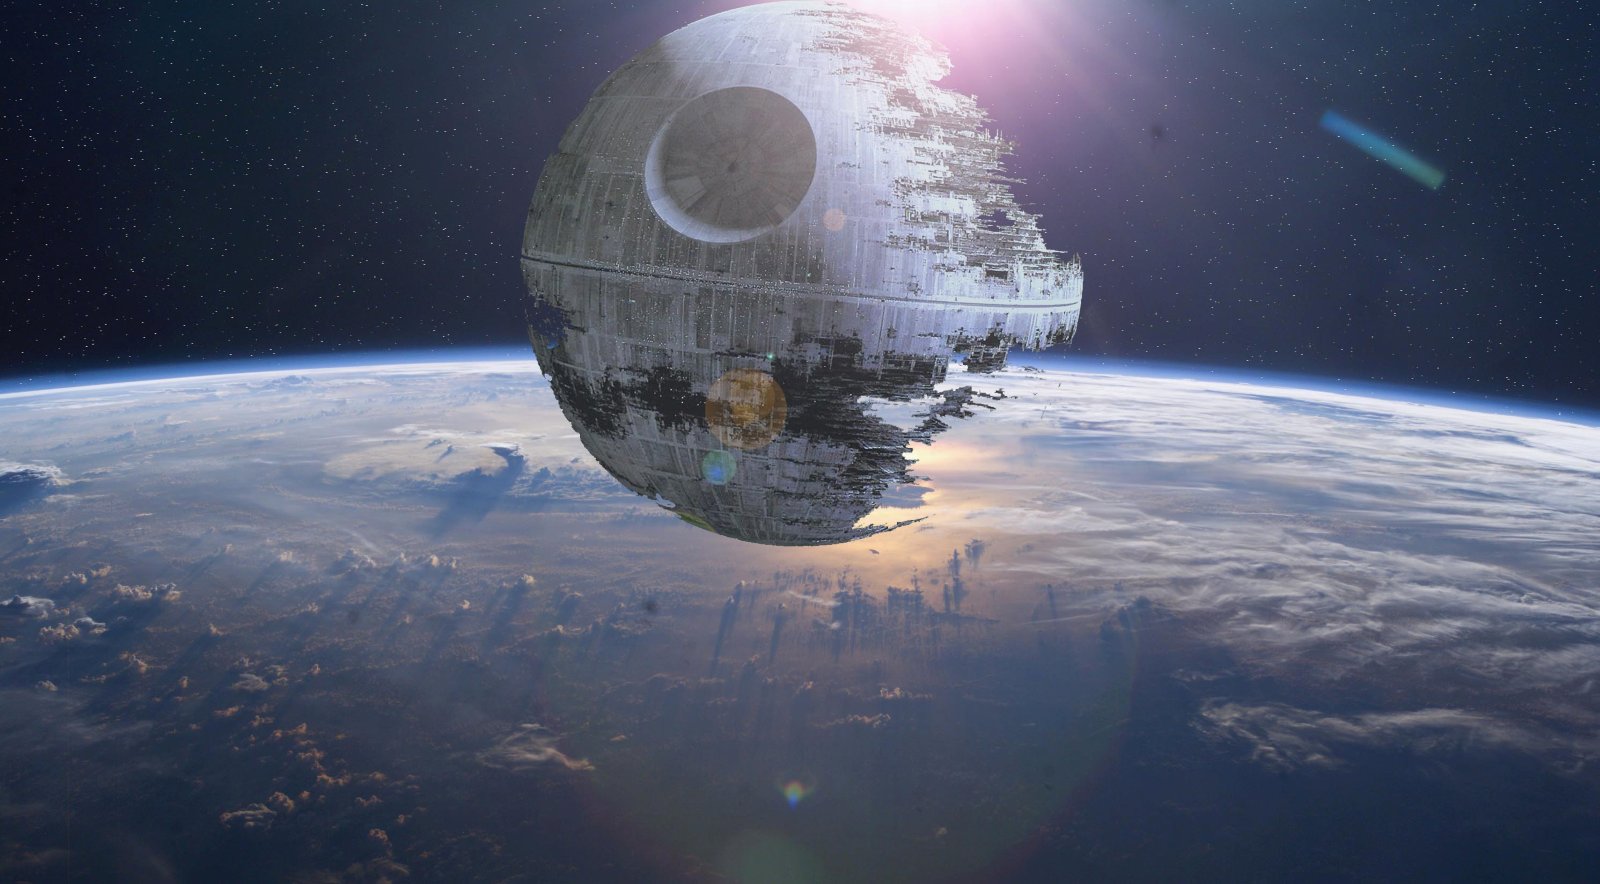 http://www.space.news/wp-content/uploads/sites/38/2015/12/Big-Death-Star.jpg